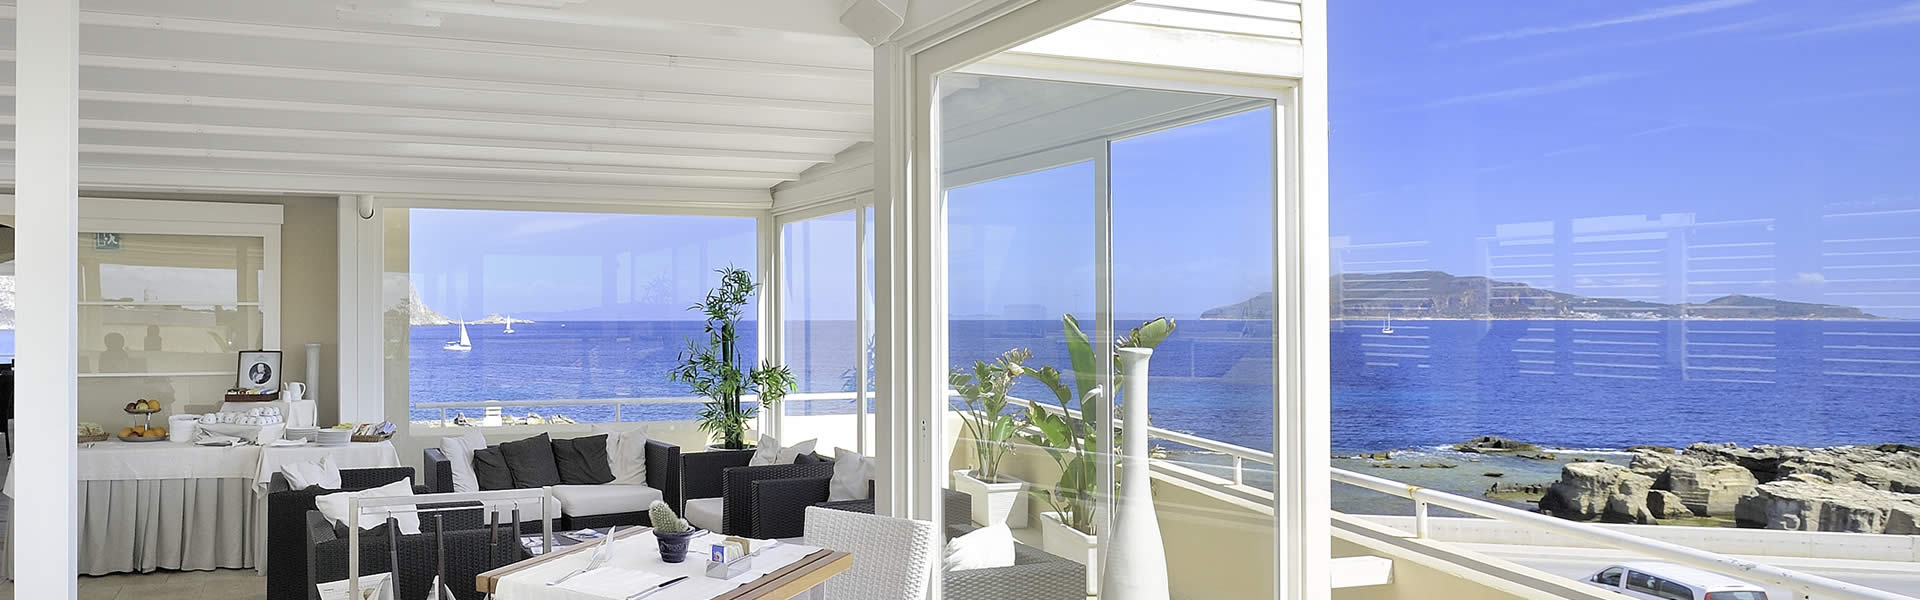 HTM gives a kind awakening to its guests, by welcoming them in the enchanting terrace for breakfast. From there you can enjoy the view on Favignana sea in the morning light, while we serve an inviting buffet breakfast.